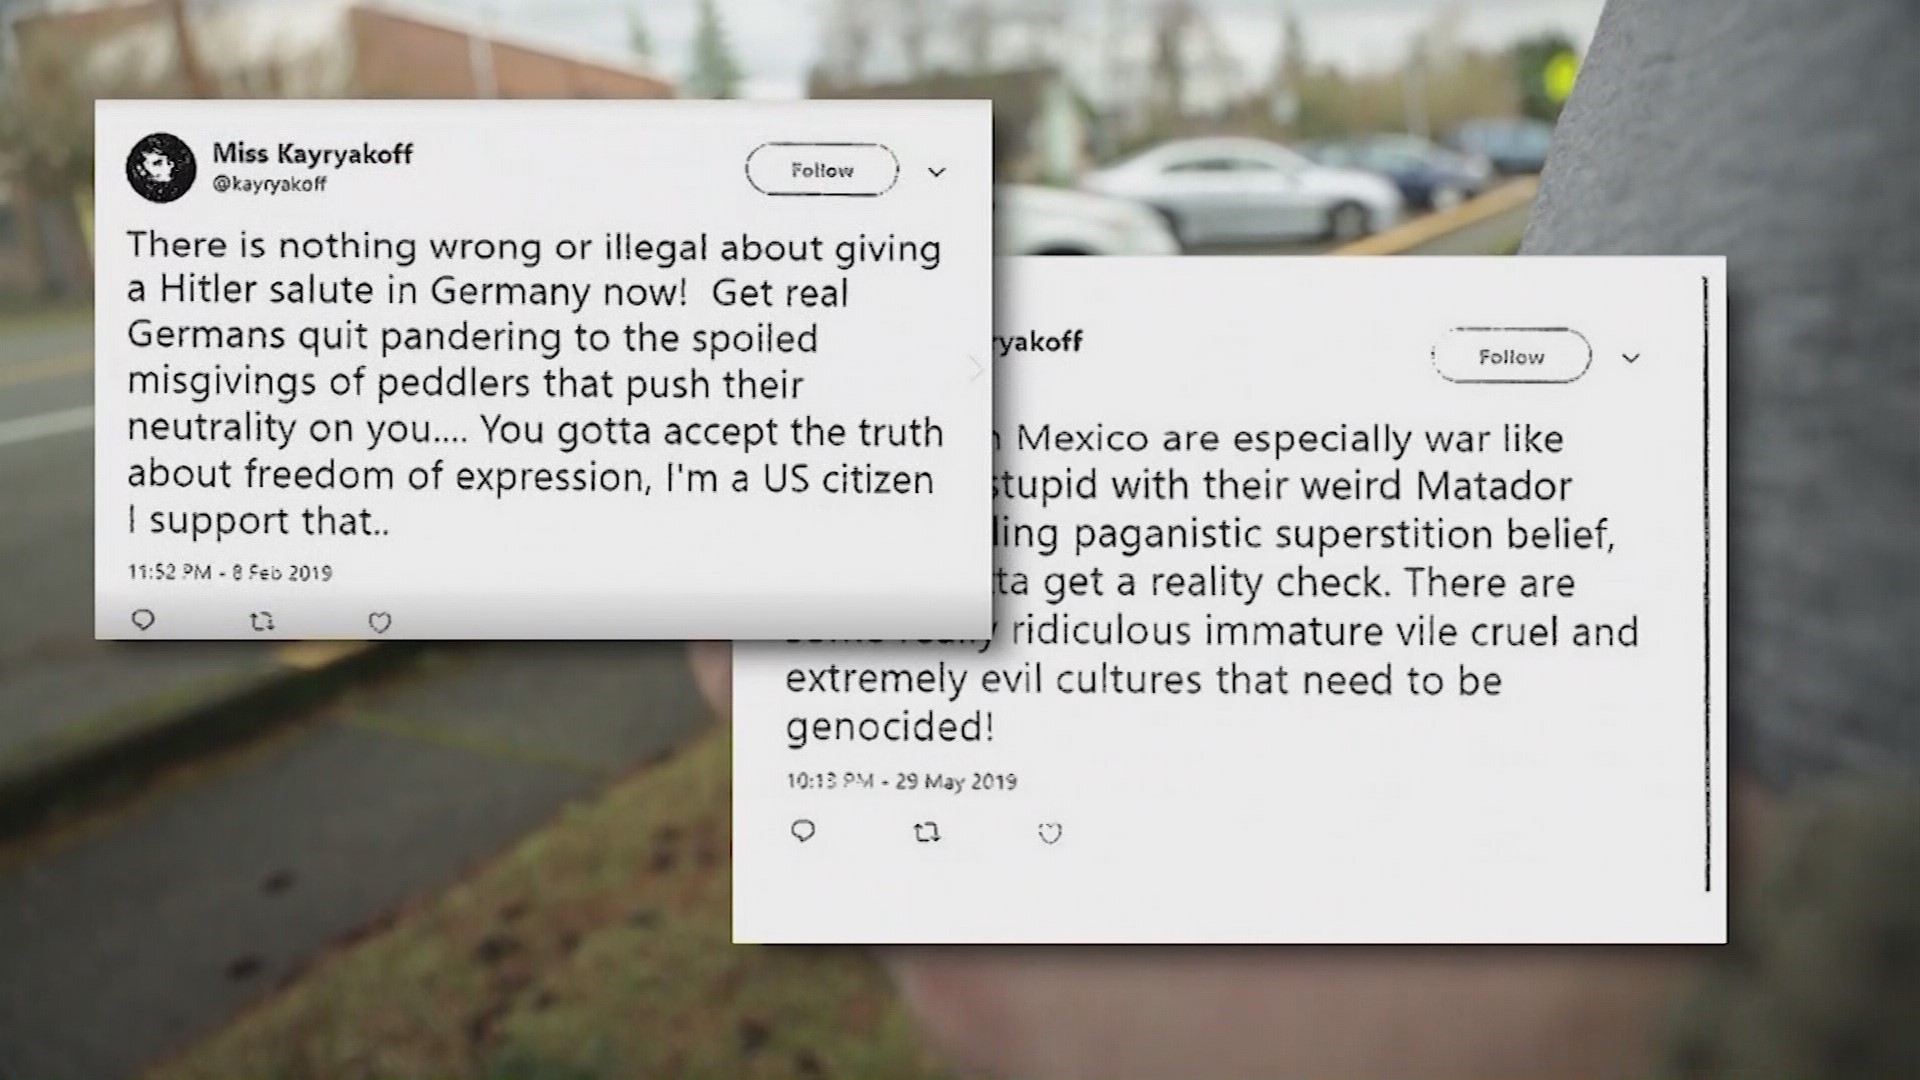 Parents of students in the Kent School District are voicing concerns about a series of racist and xenophobic tweets apparently sent by a teacher.